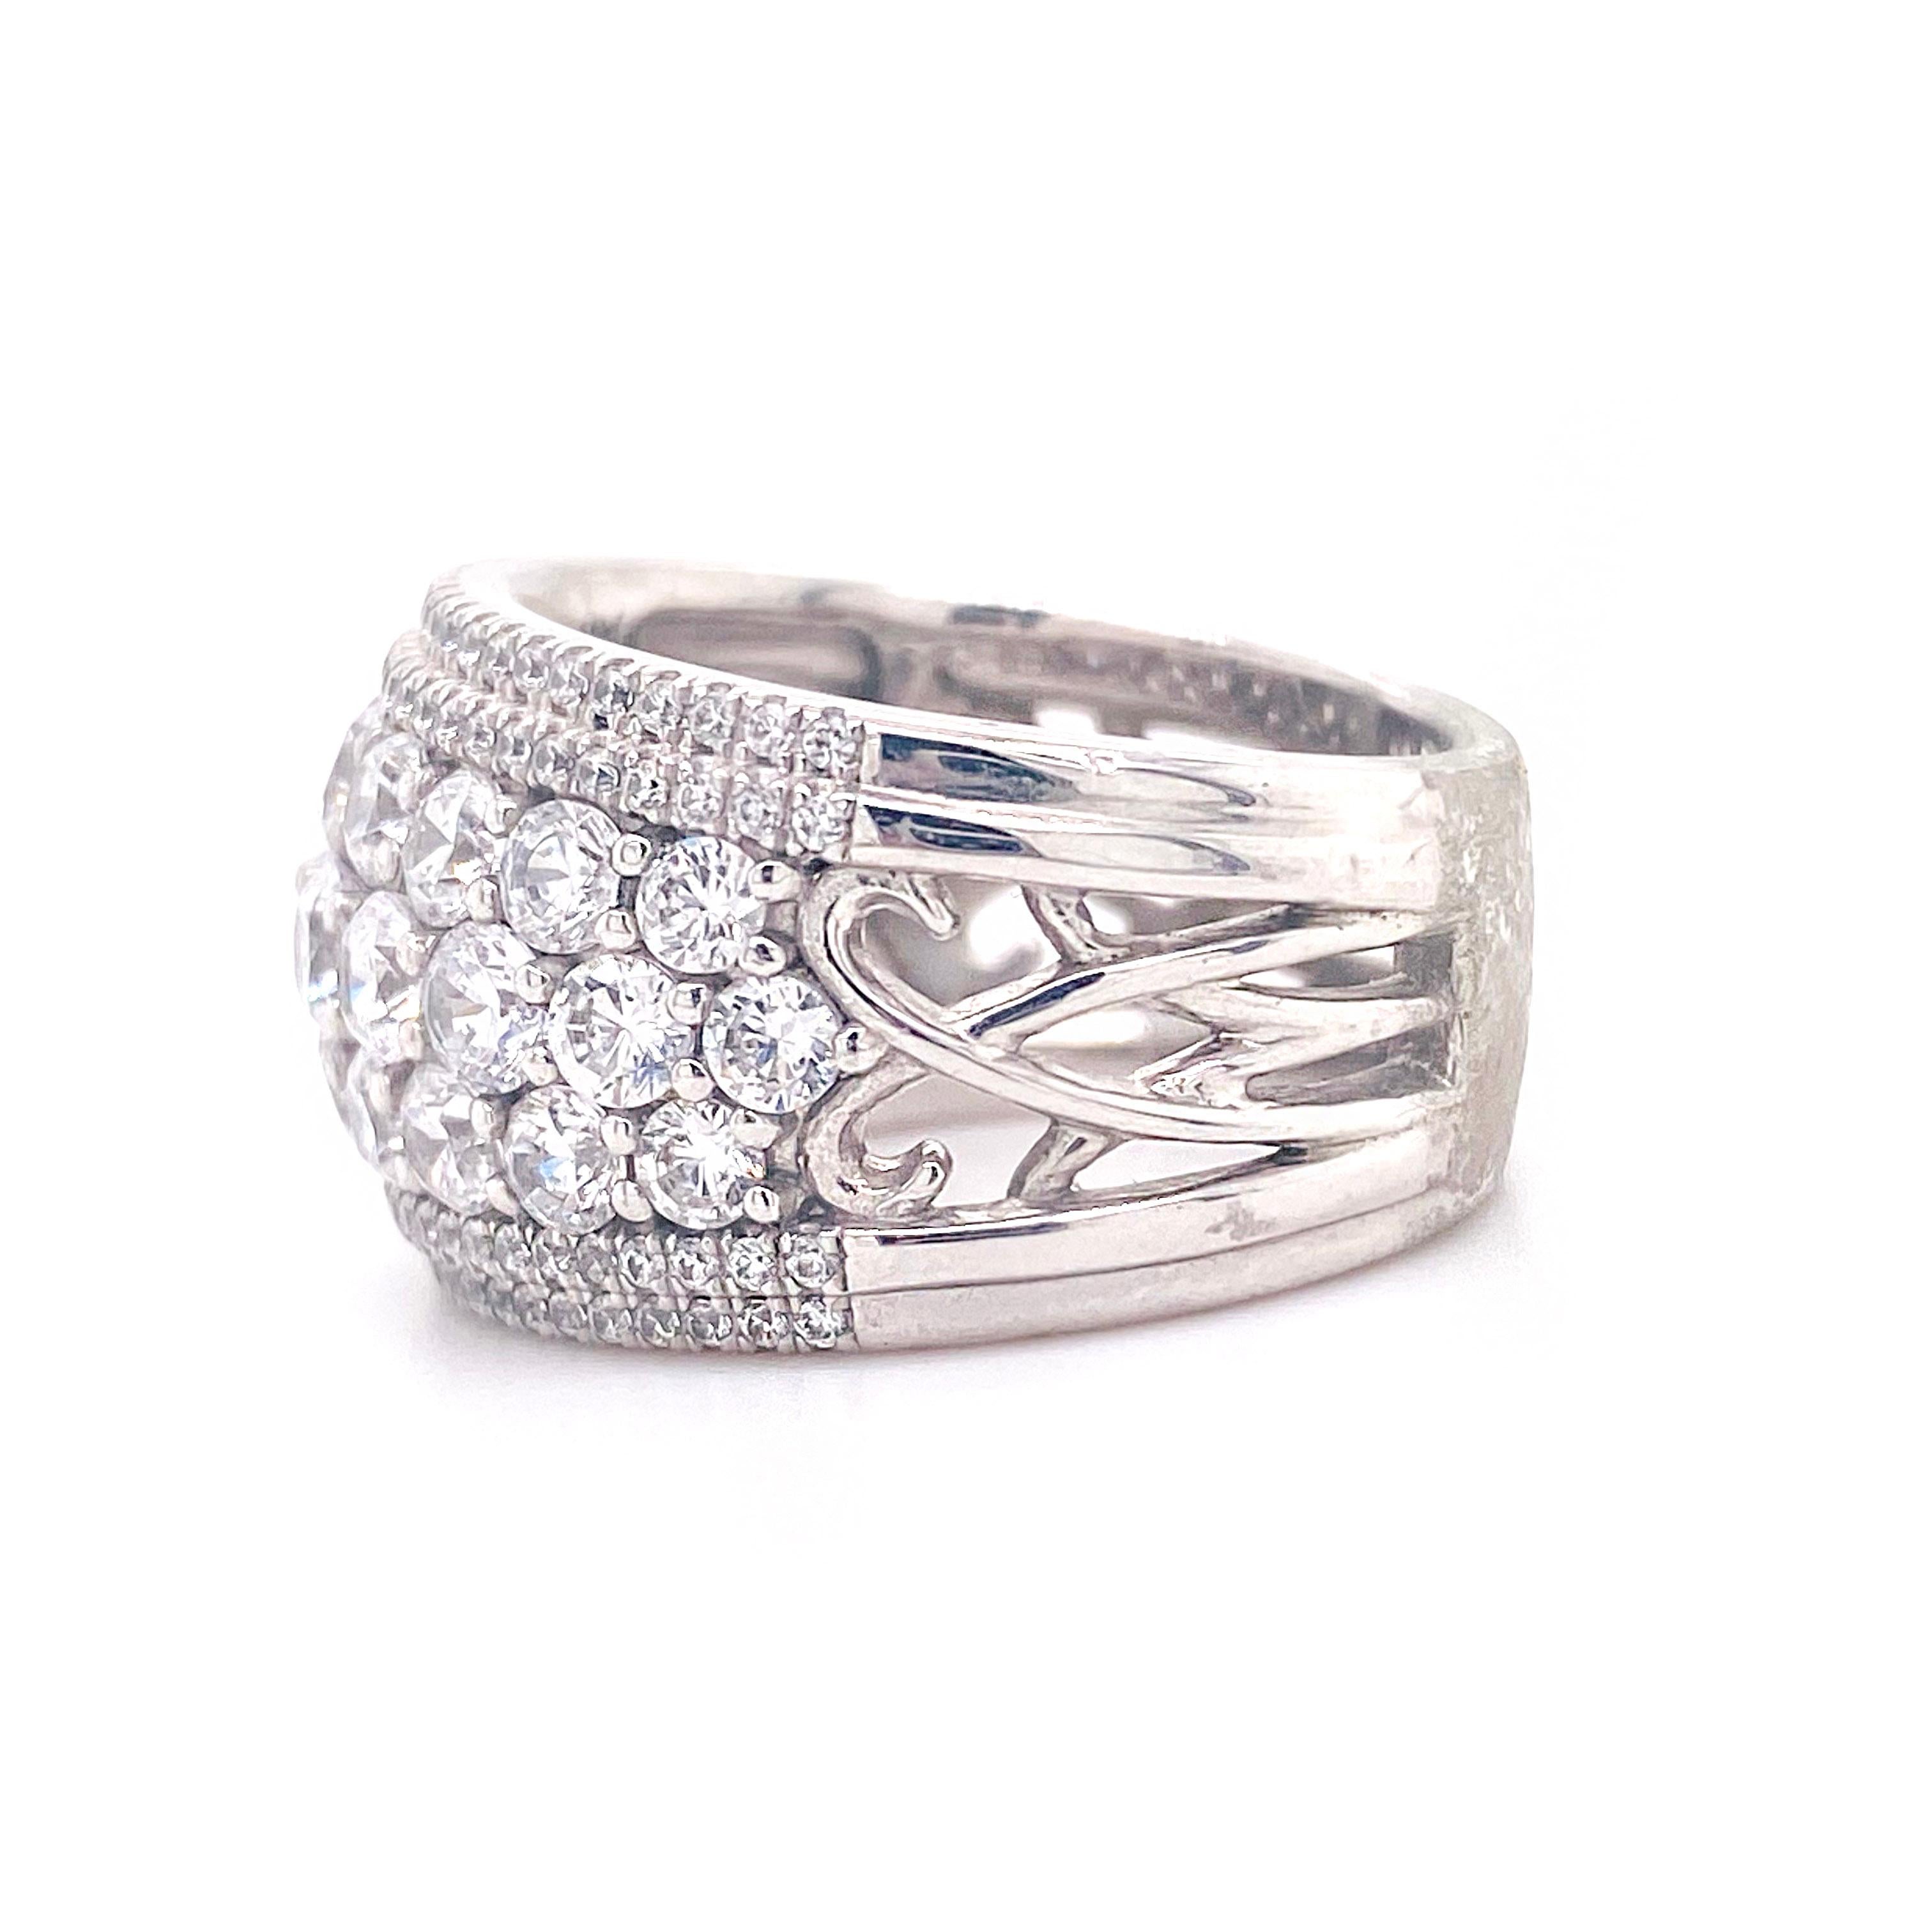 For Sale:  Diamond Anniversary Band, Custom Made Wide Wedding Band-Allow 3-4 Weeks Delivery 3